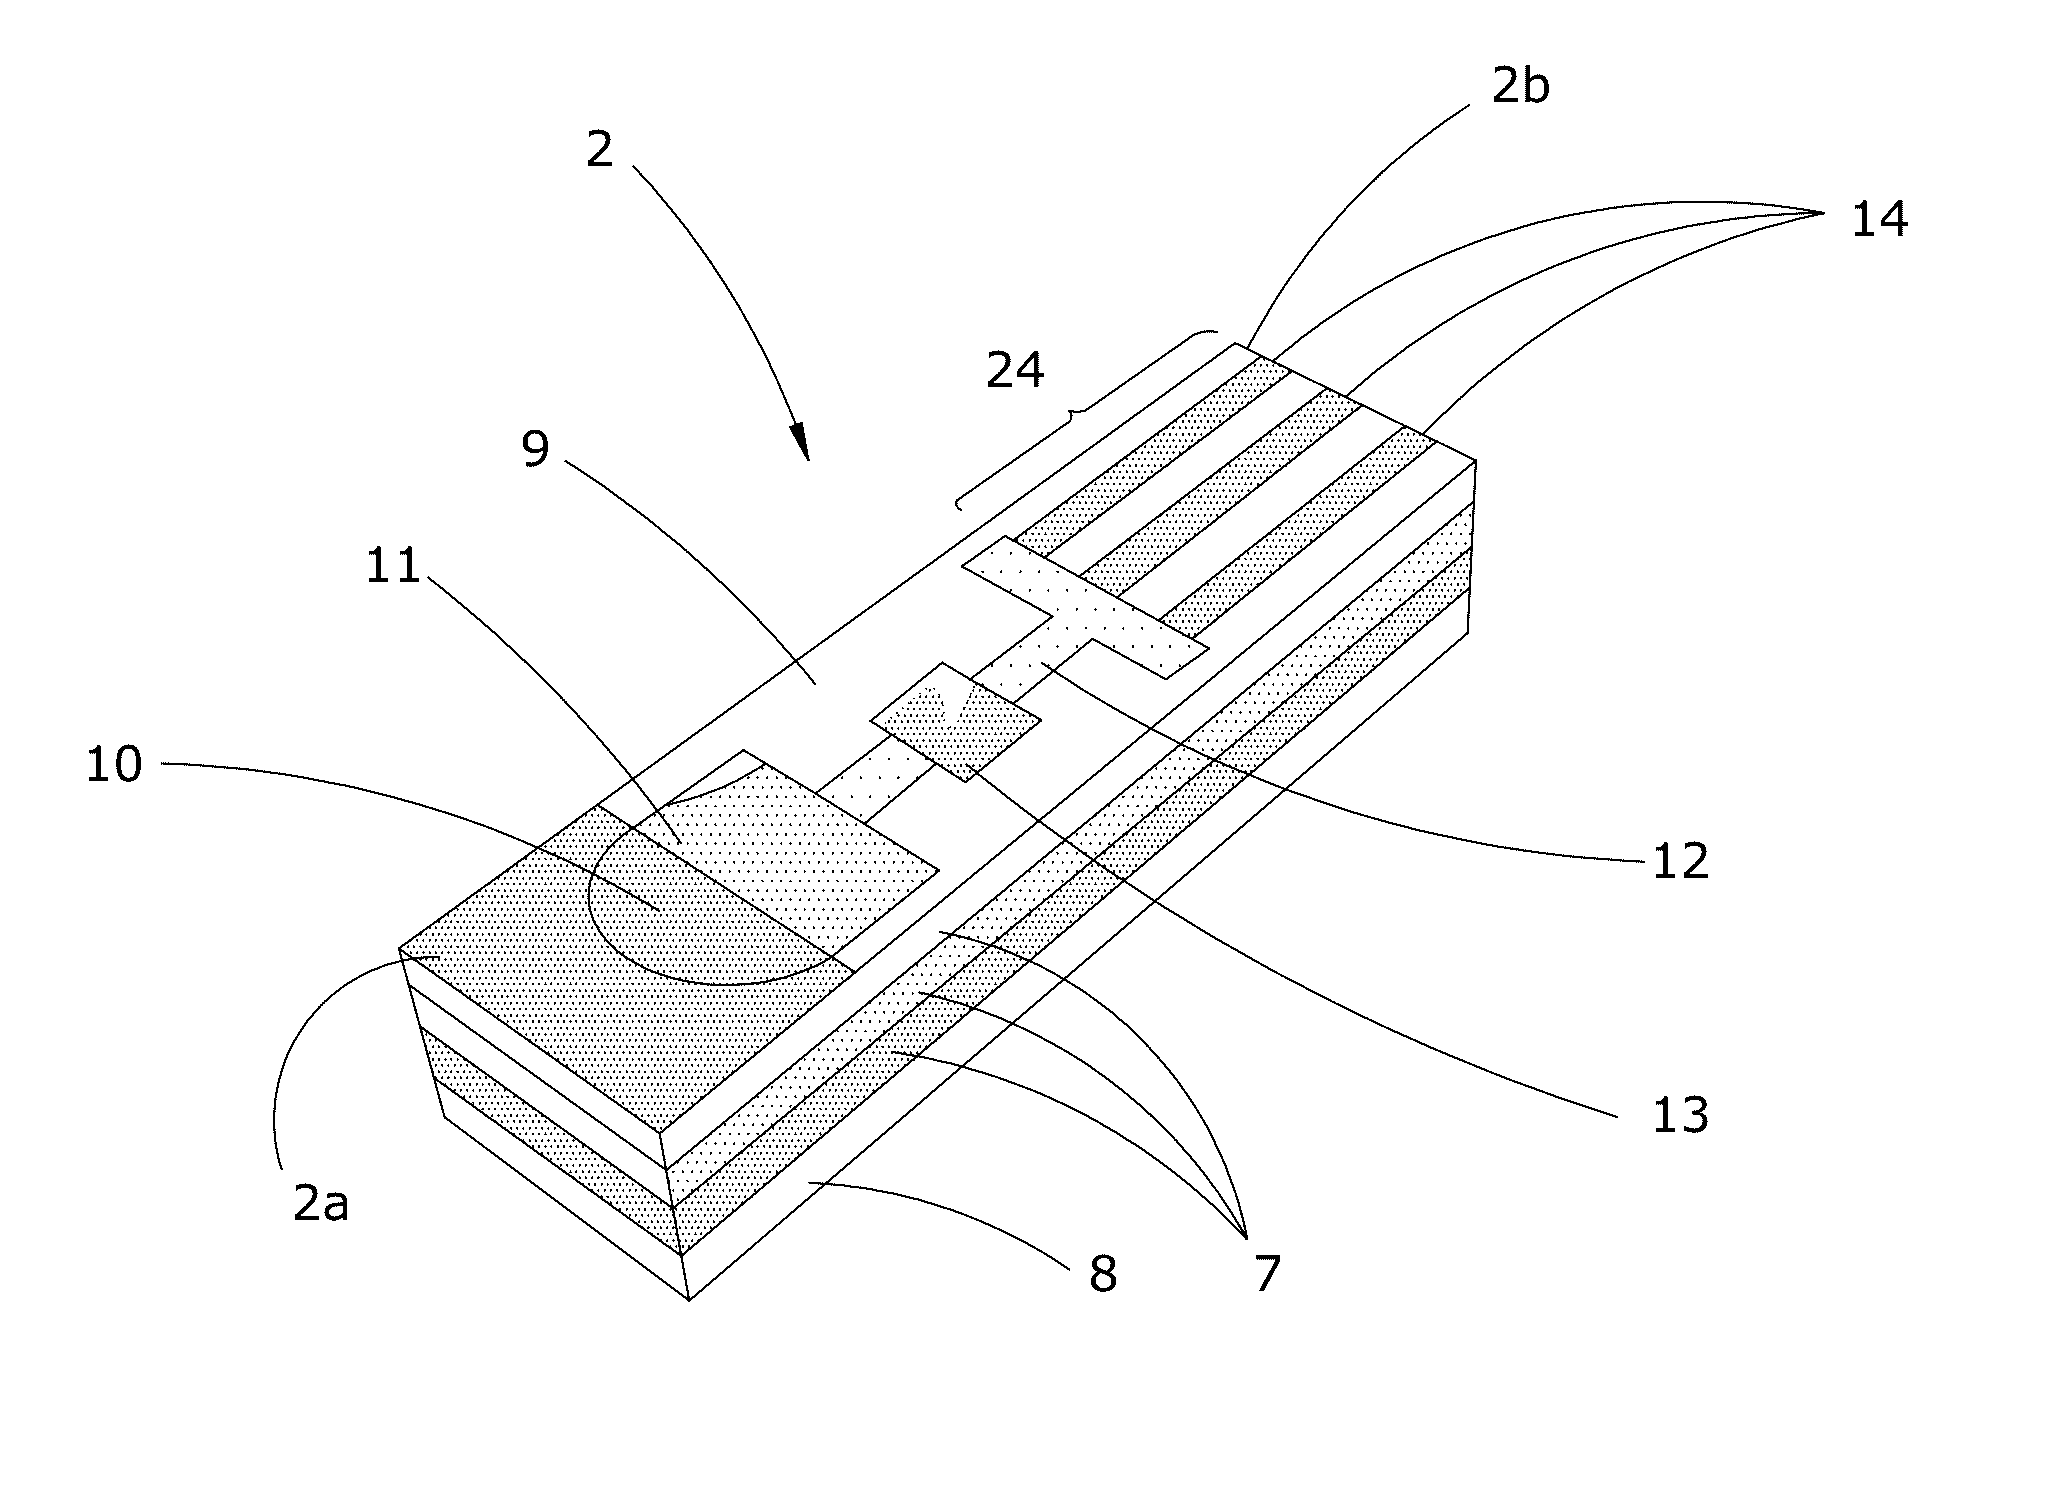 Microfluidic cartridge and reader device, system, and method of use